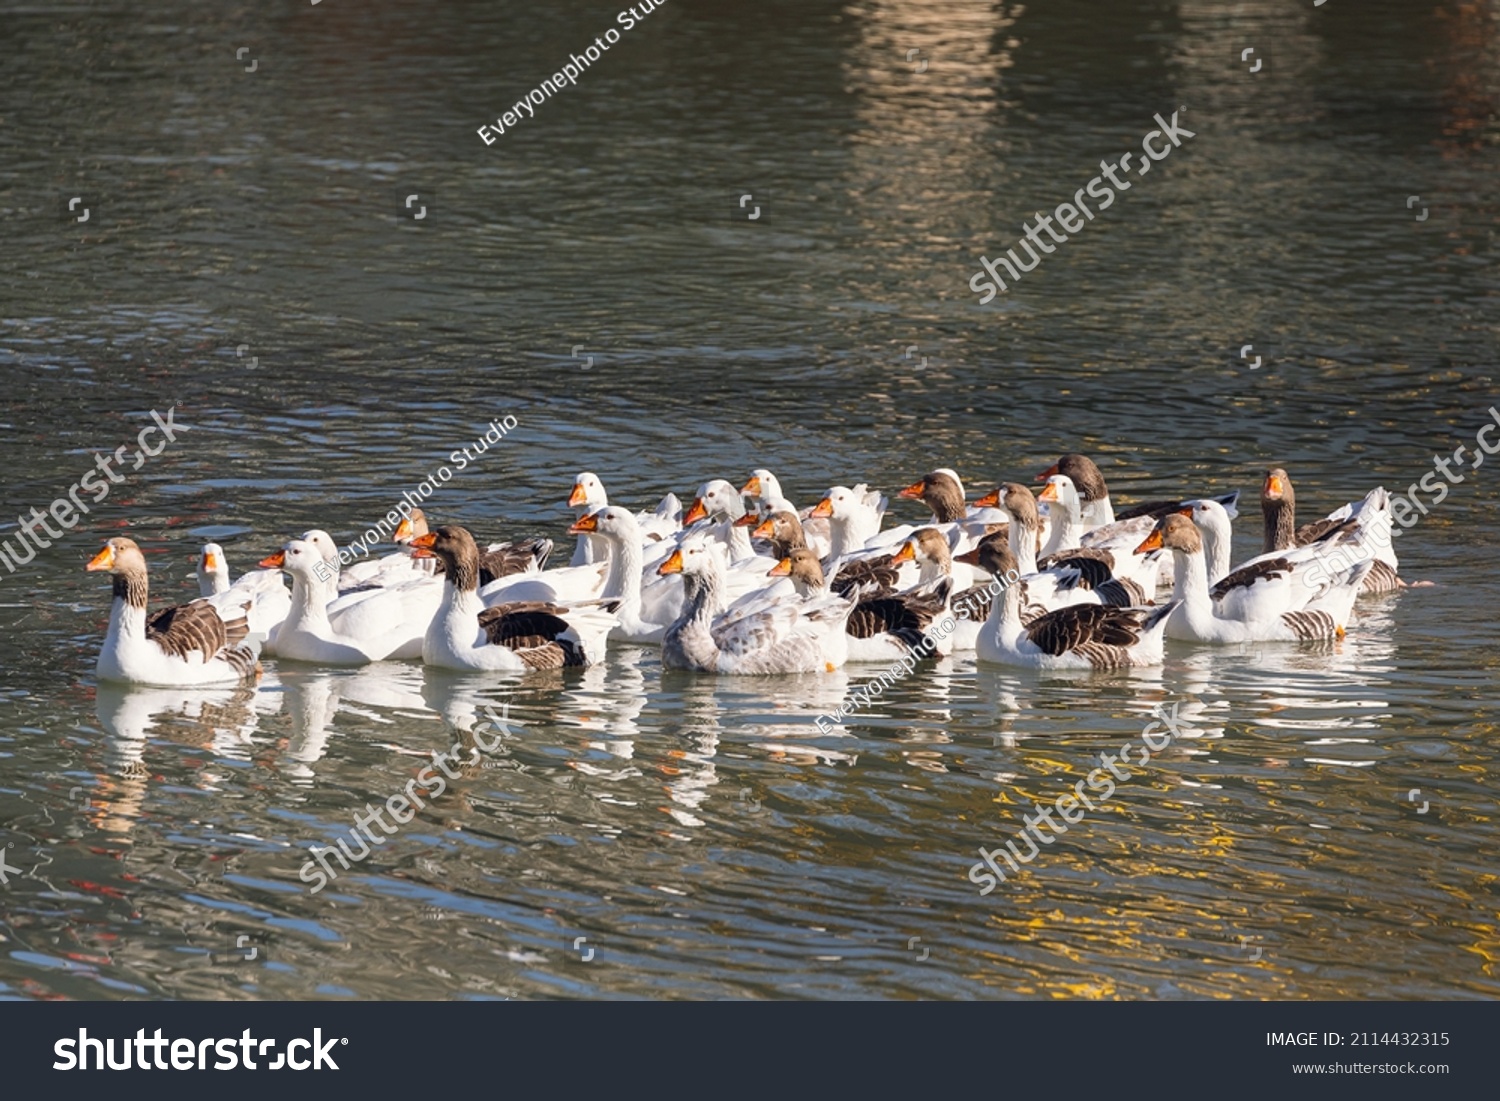 A covey of wild duck is in the river. White ducks swimming in the pond together #2114432315